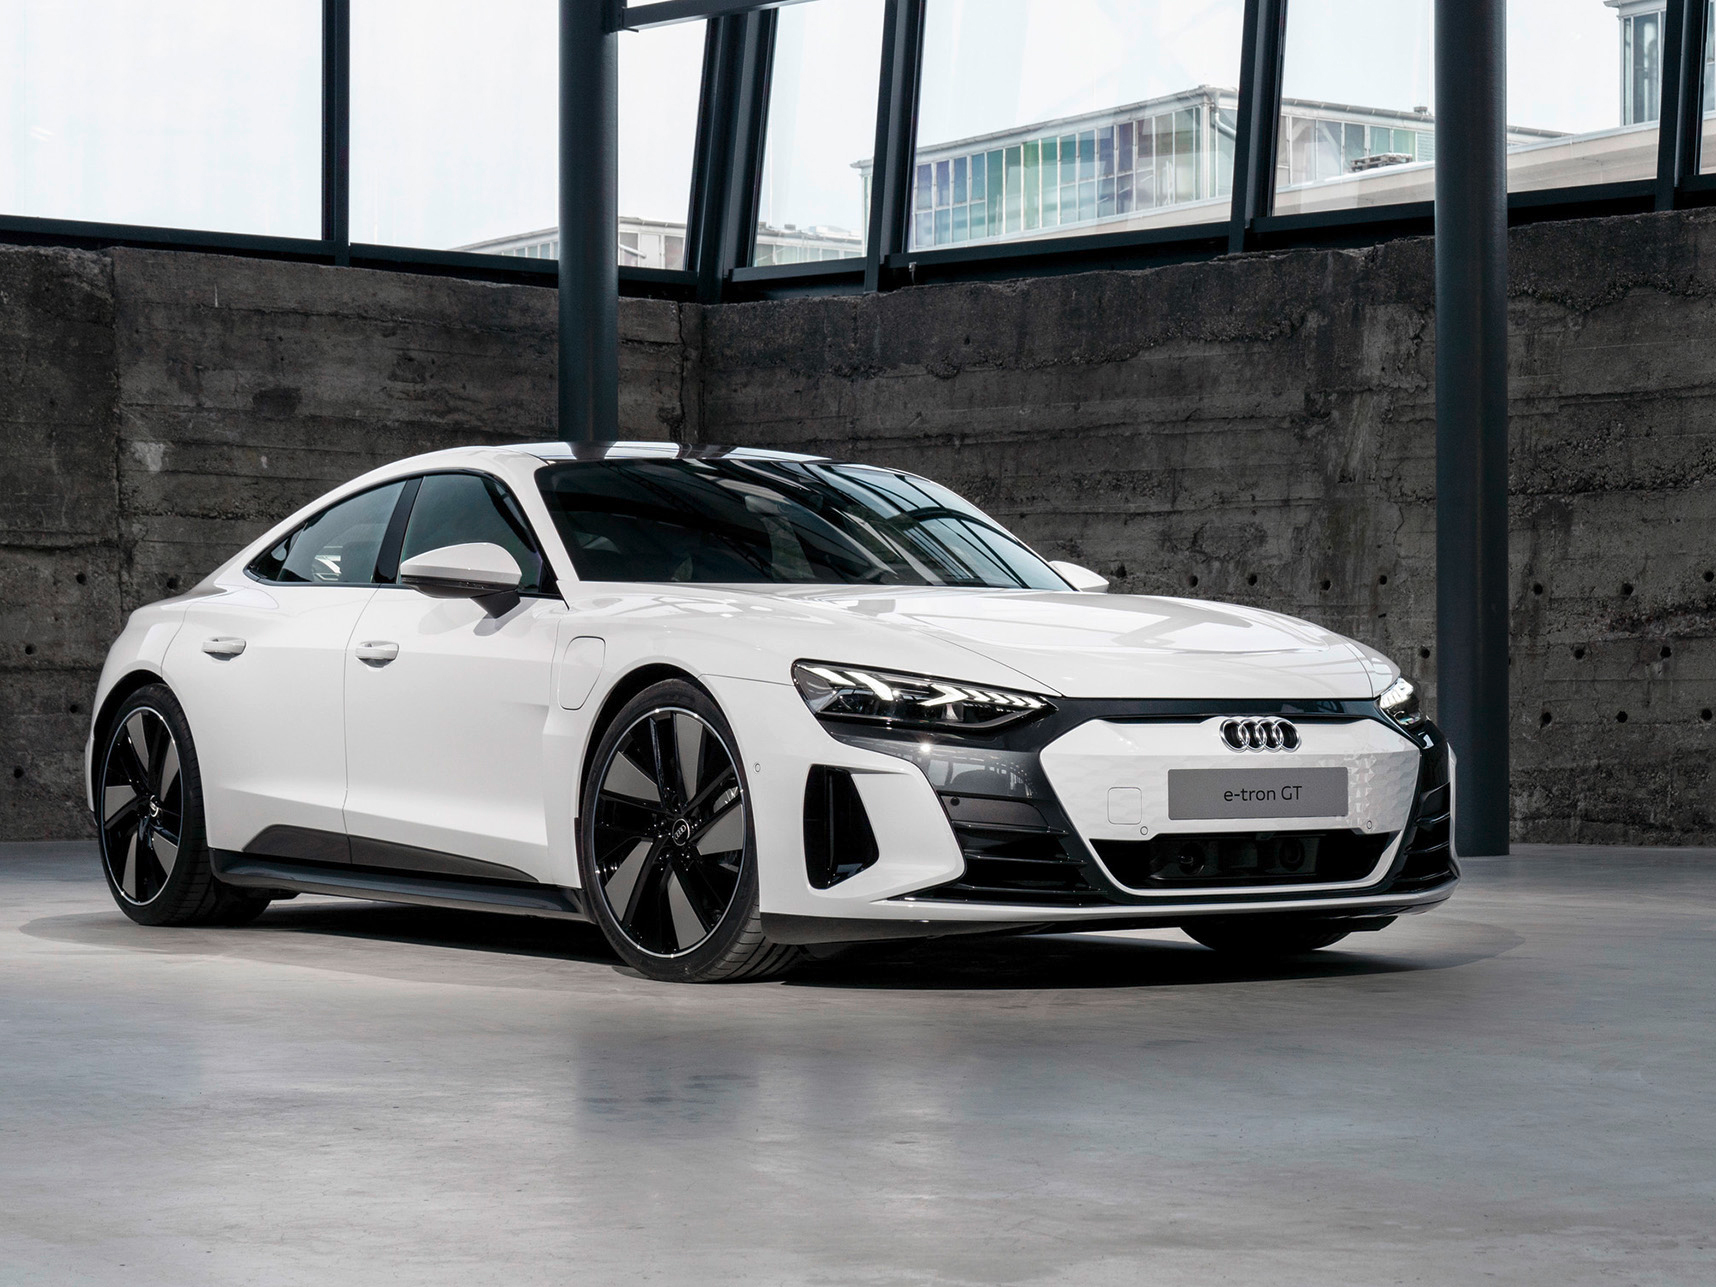 New Audi E Tron Gt Is Brand S Most Powerful Luxury Electric Coupe Bloomberg